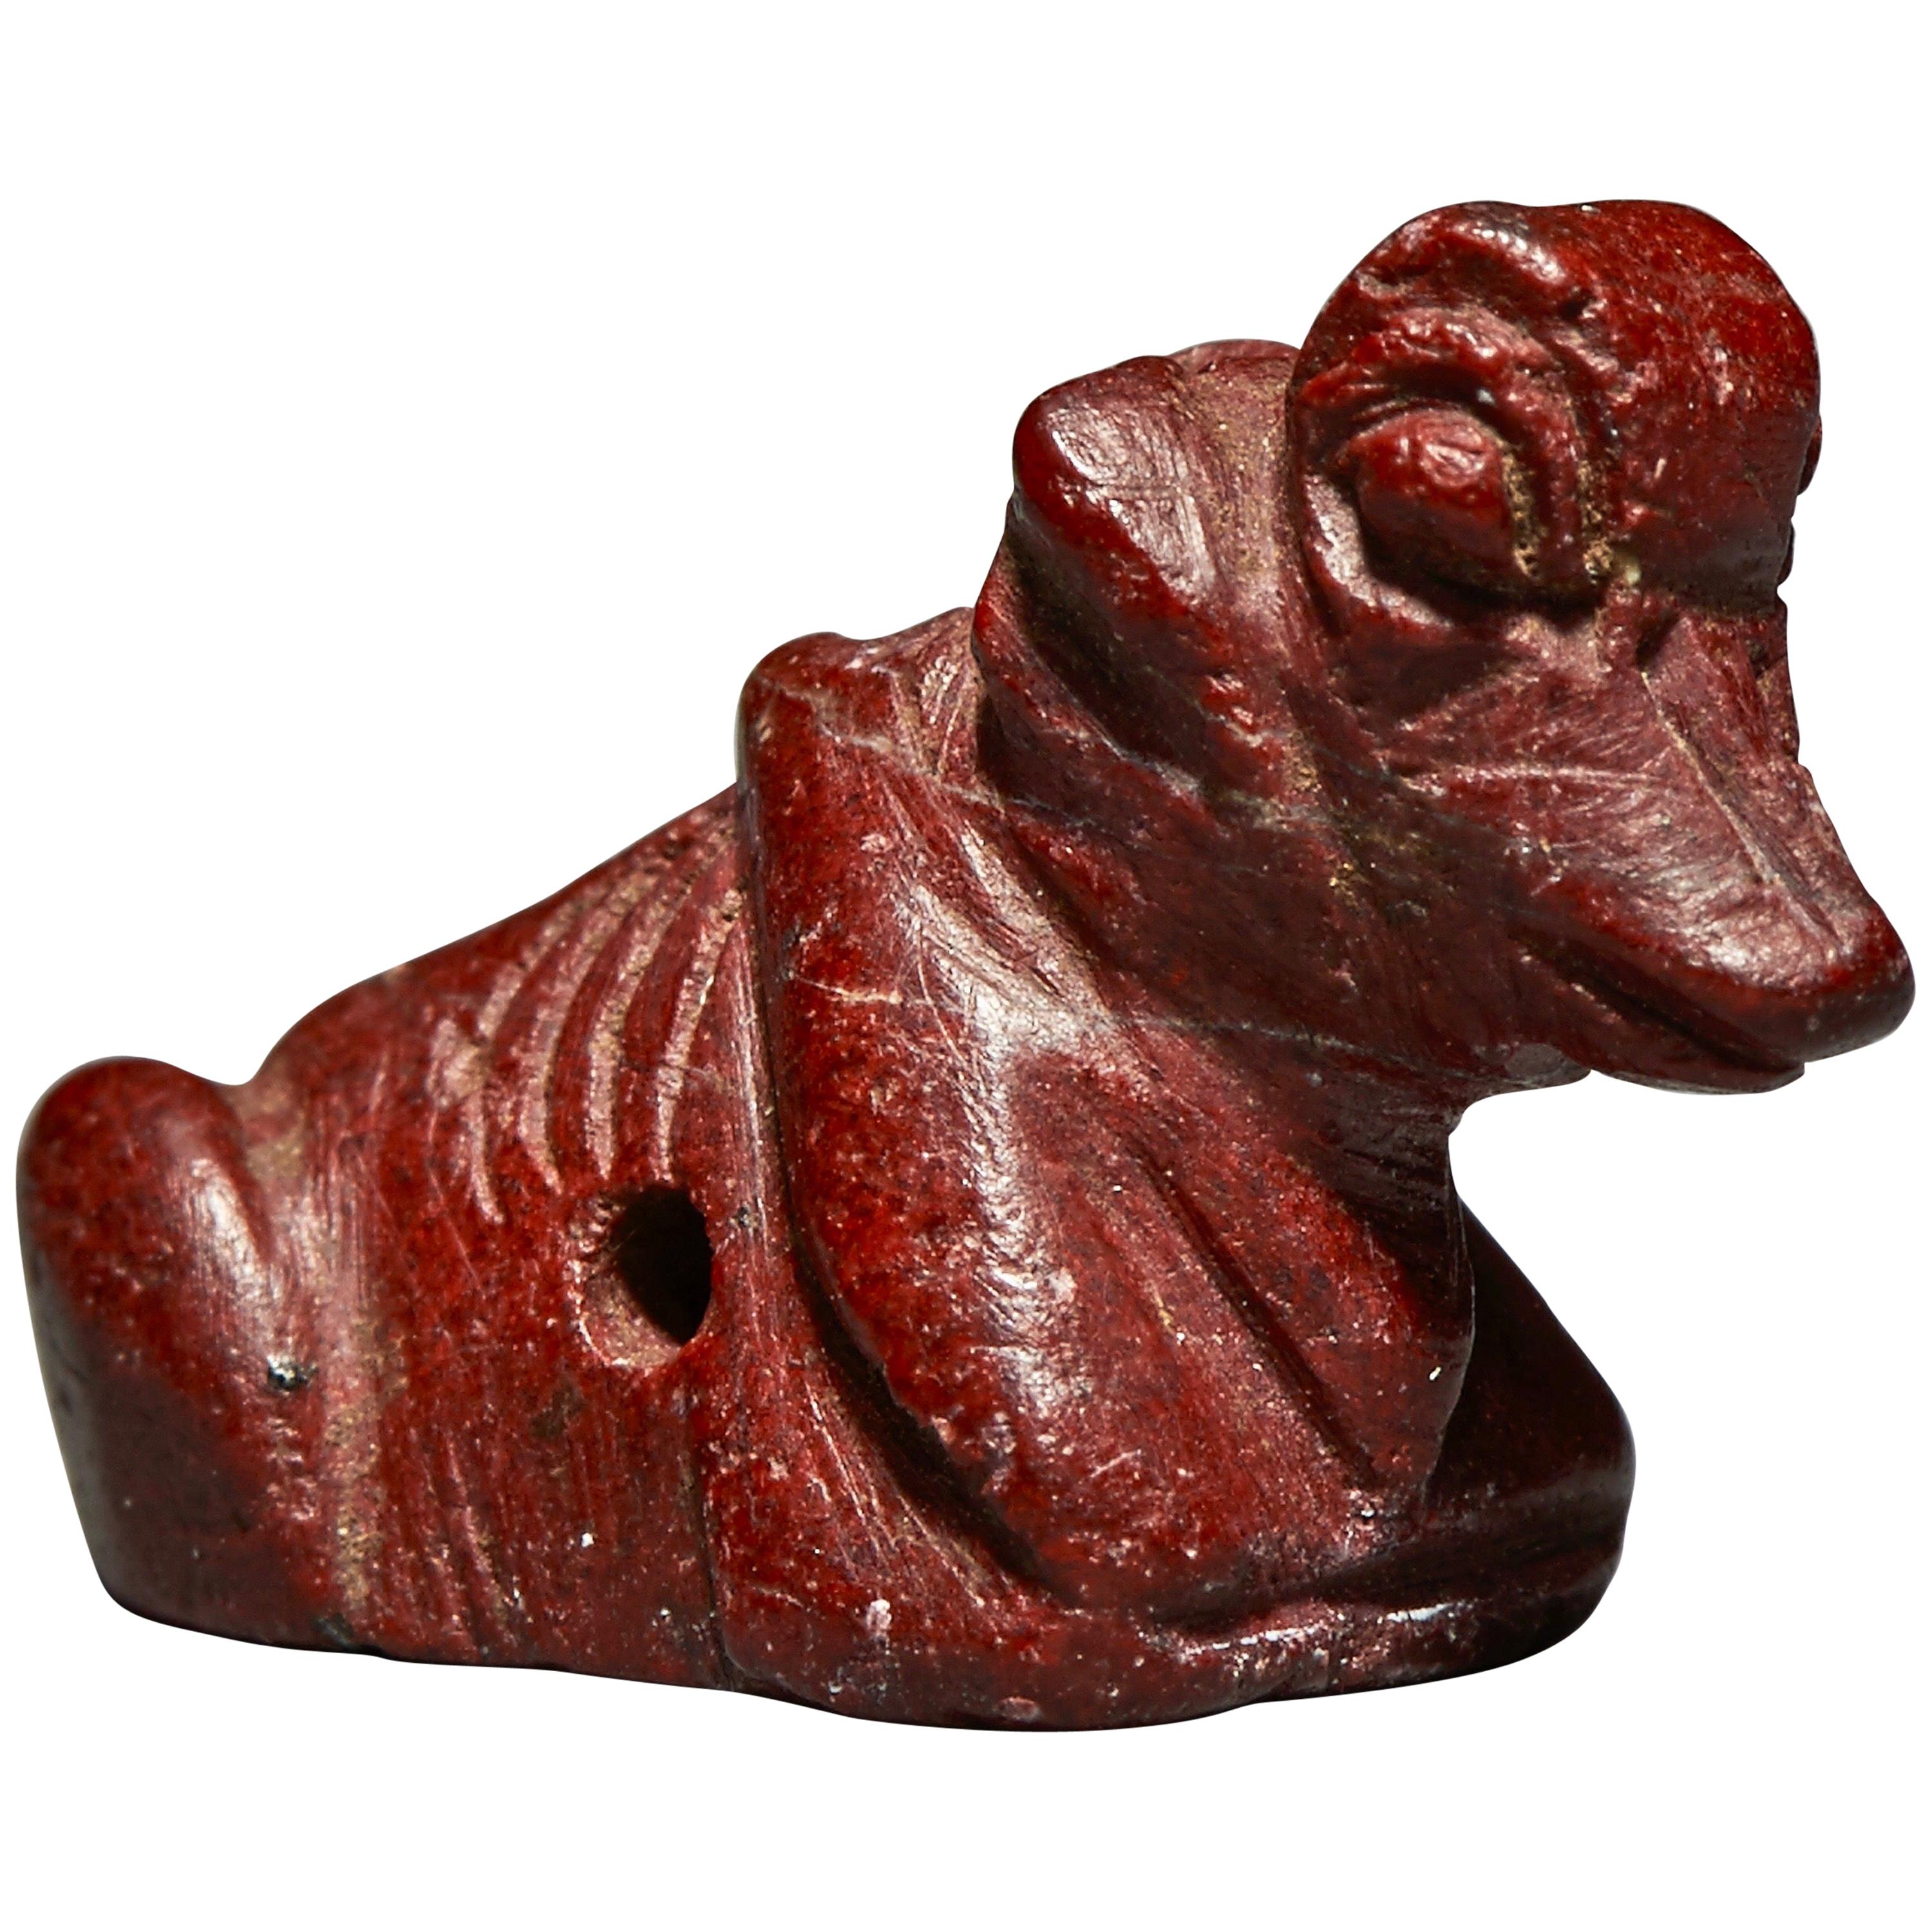 Urartu Seal Amulet in the Form of a Reclining Bovine For Sale